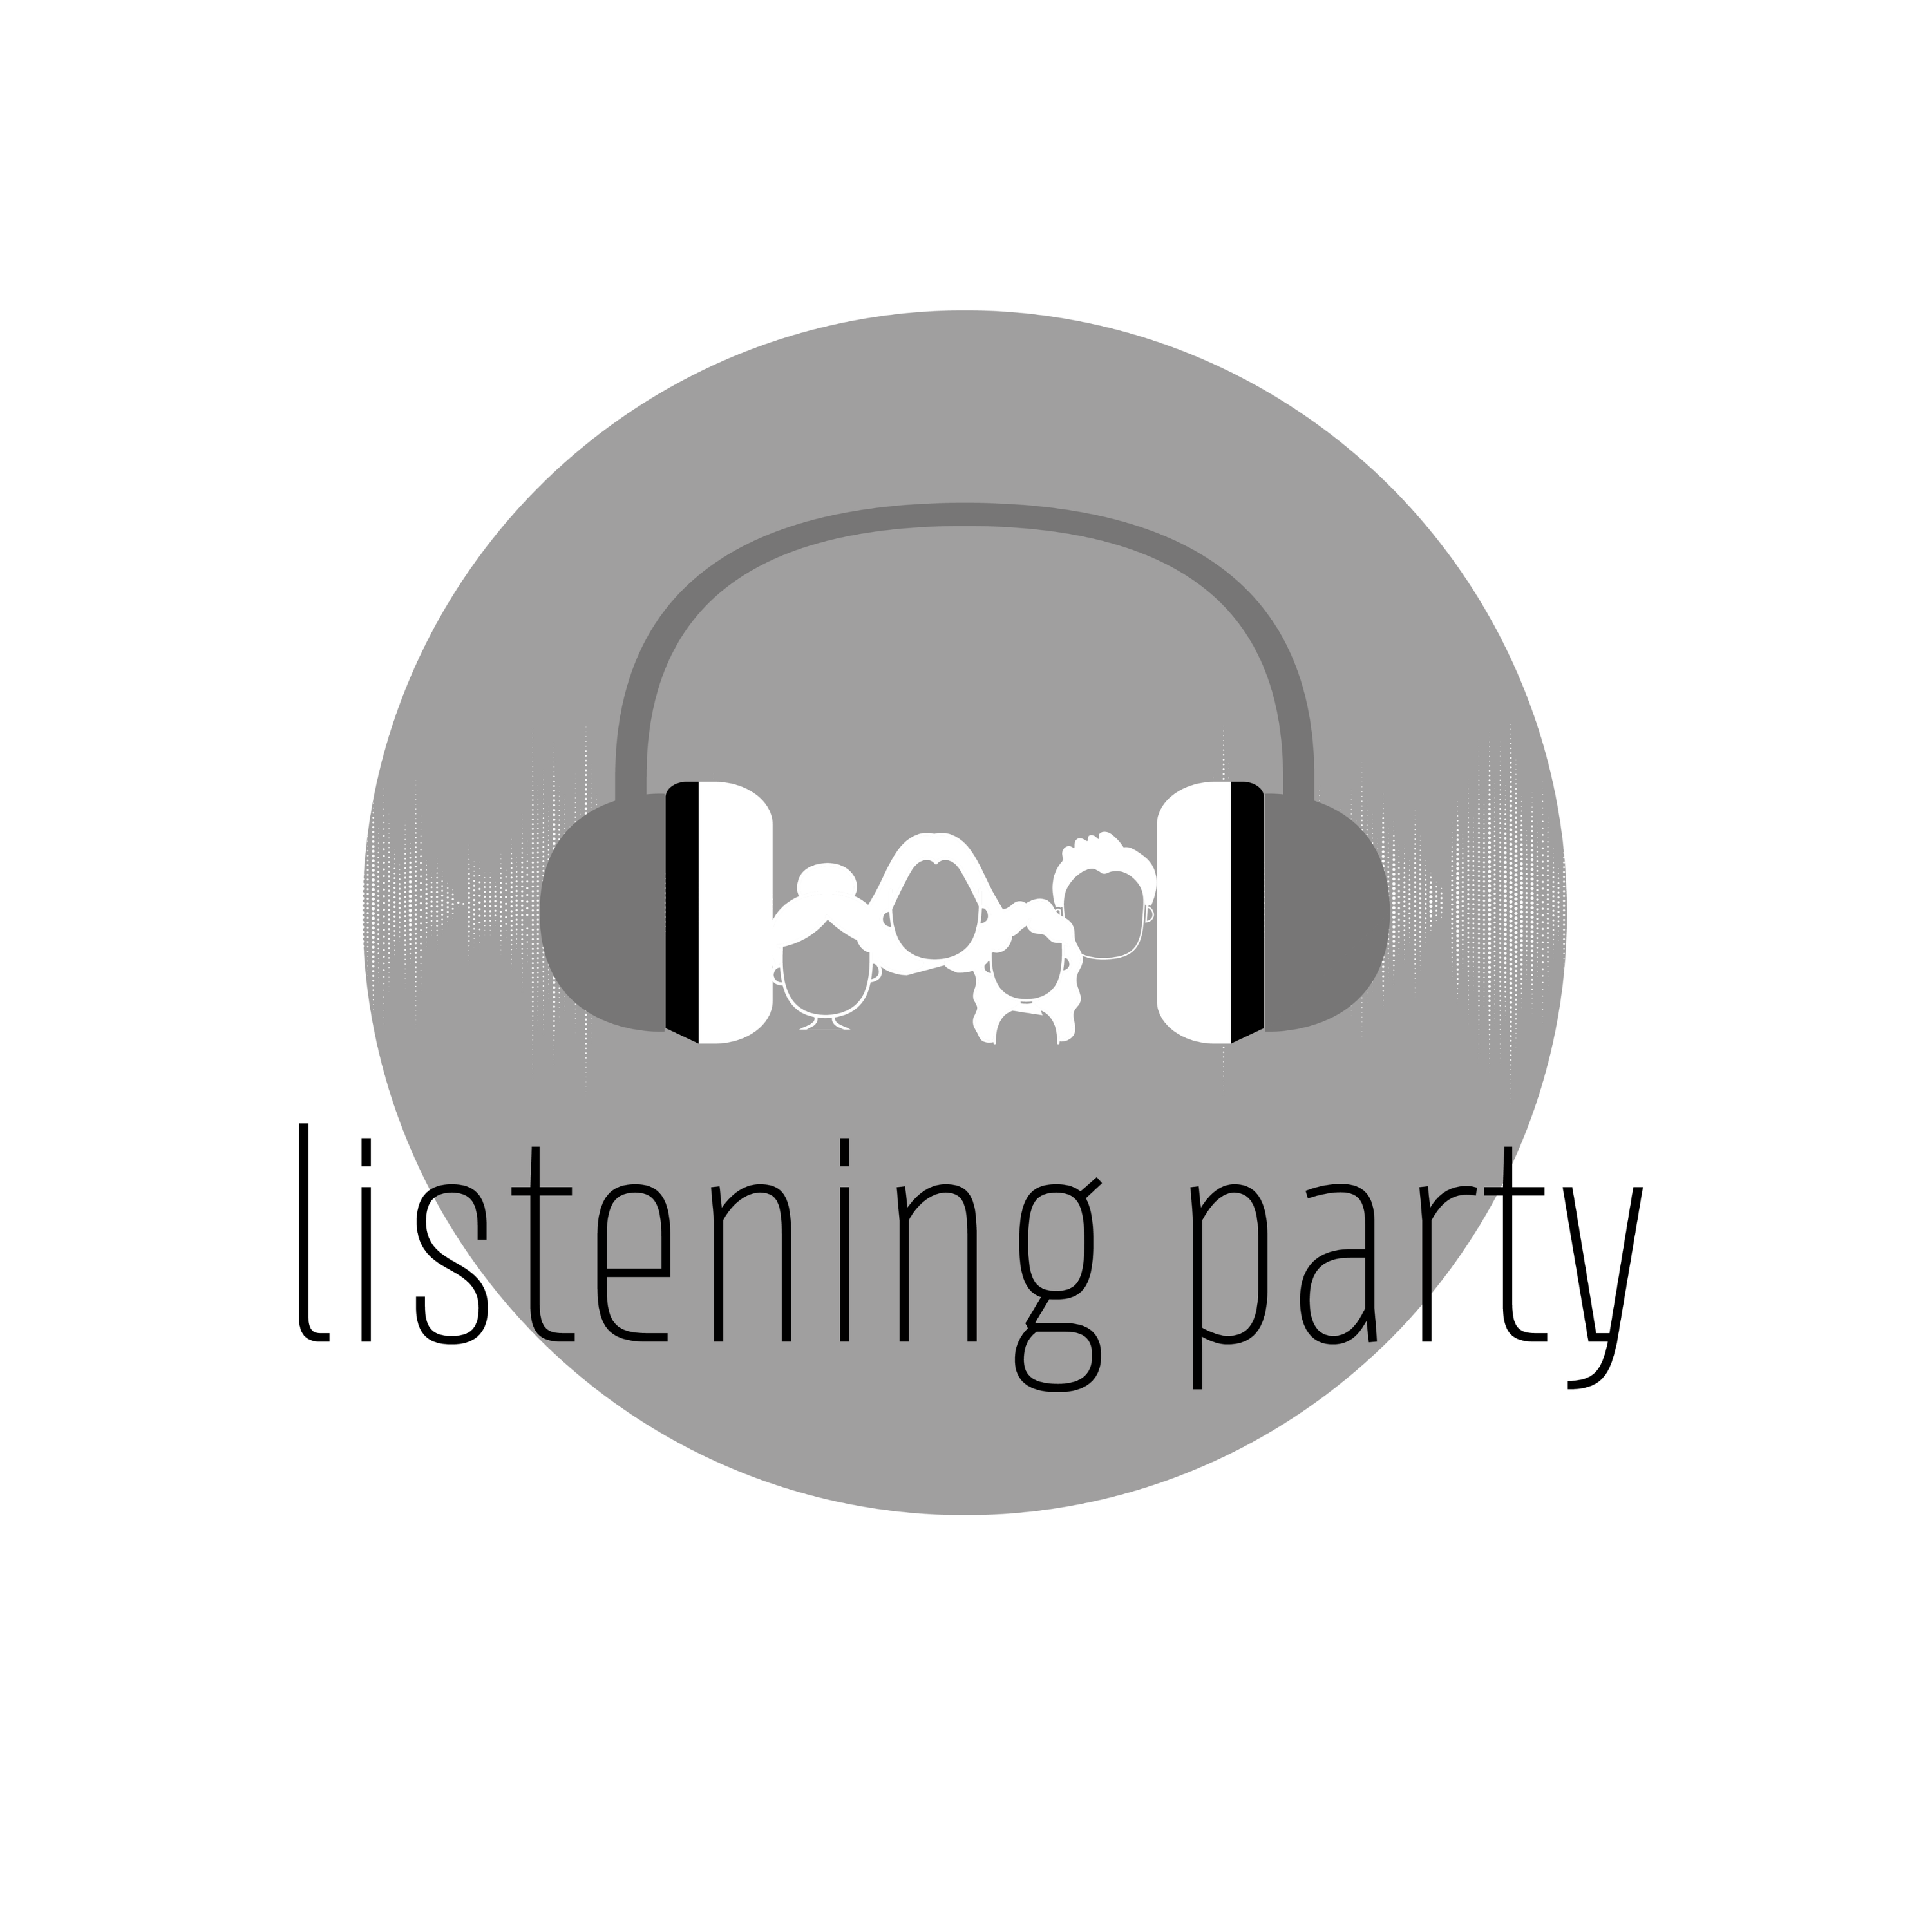 Listening Party!